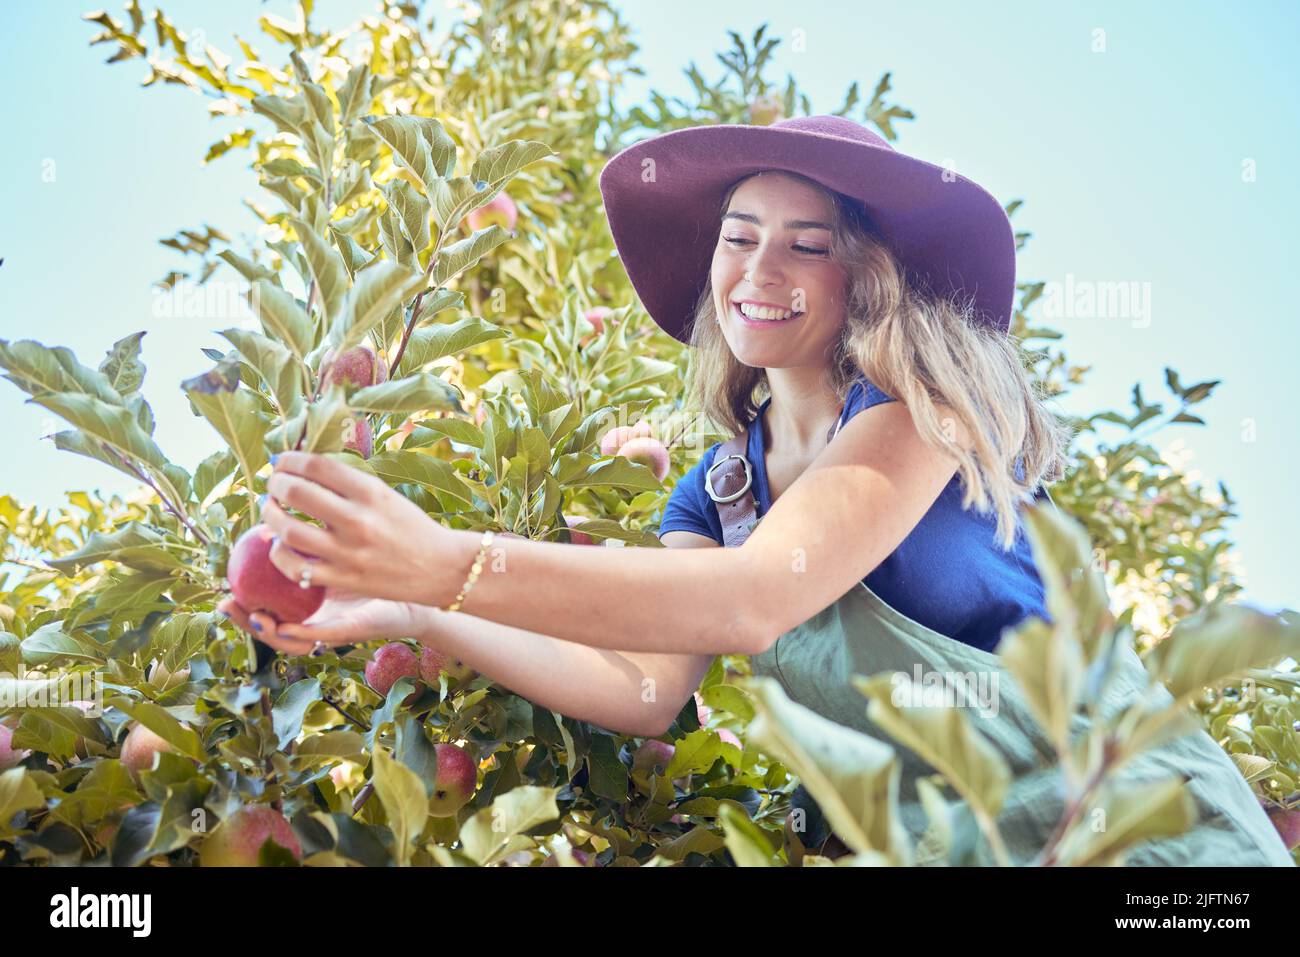 https://c8.alamy.com/comp/2JFTN67/young-woman-picking-an-apple-from-a-tree-happy-female-wearing-a-straw-hat-and-grabbing-fruits-in-an-orchard-during-harvest-season-fresh-red-apples-2JFTN67.jpg